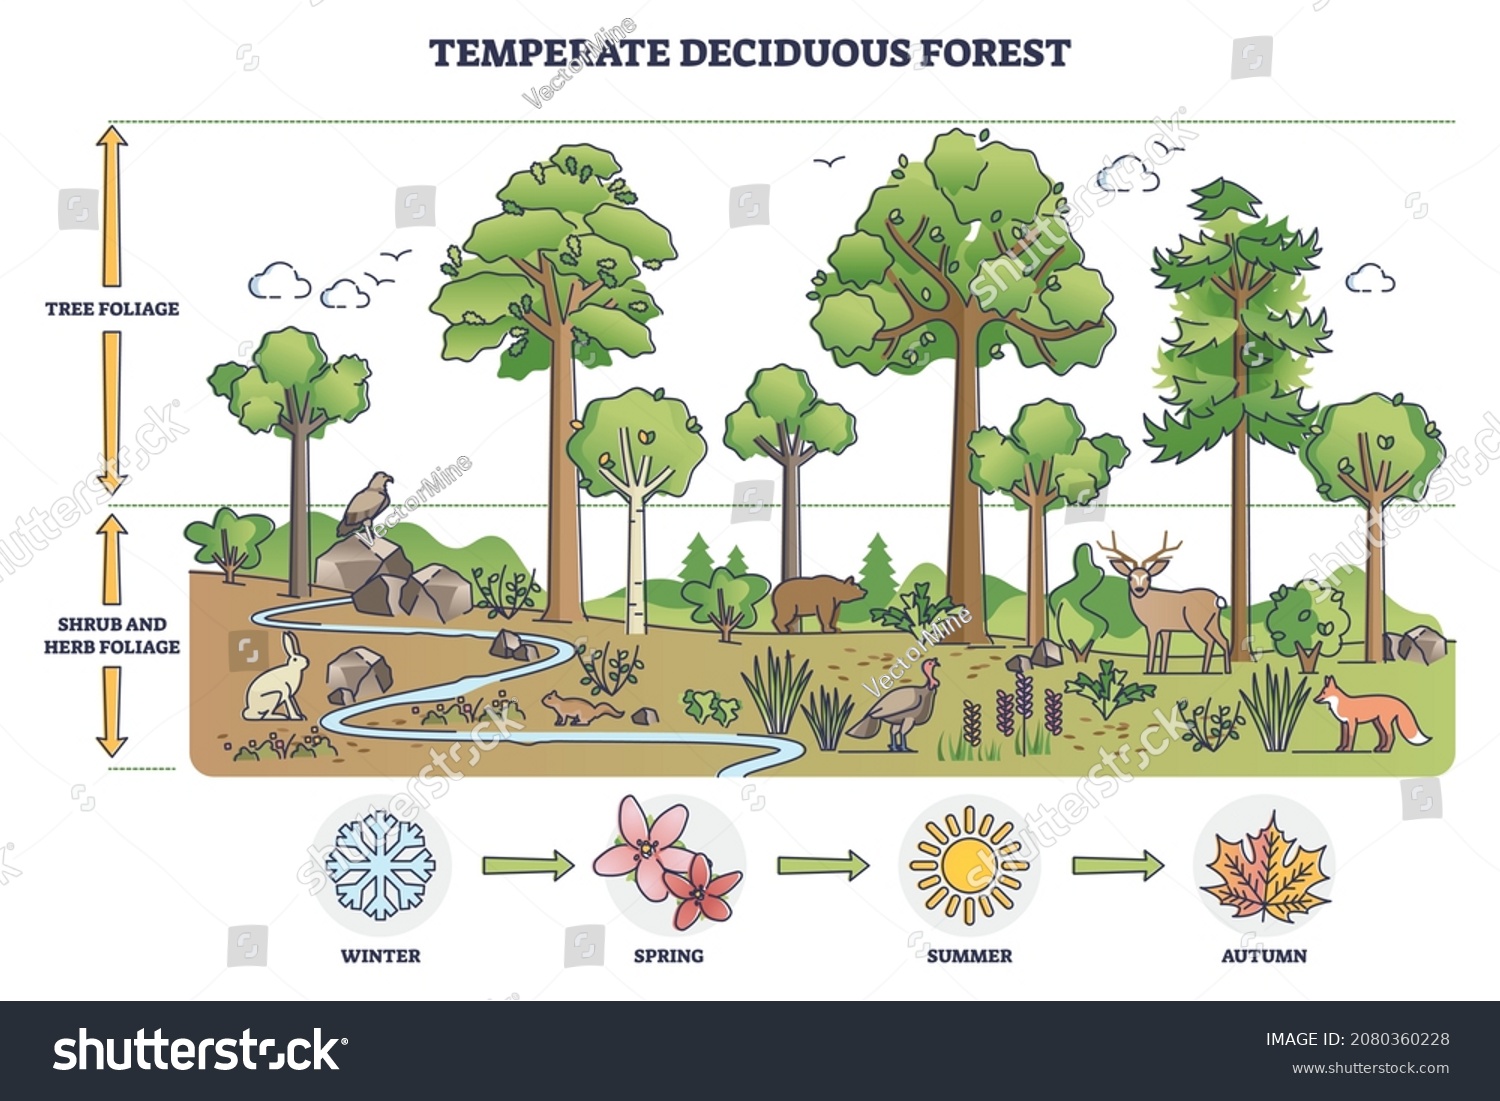 SVG of Temperate deciduous forest tree, herbs and shrub foliage description outline diagram. Labeled educational environment vegetation type with changing characteristics based on season vector illustration. svg